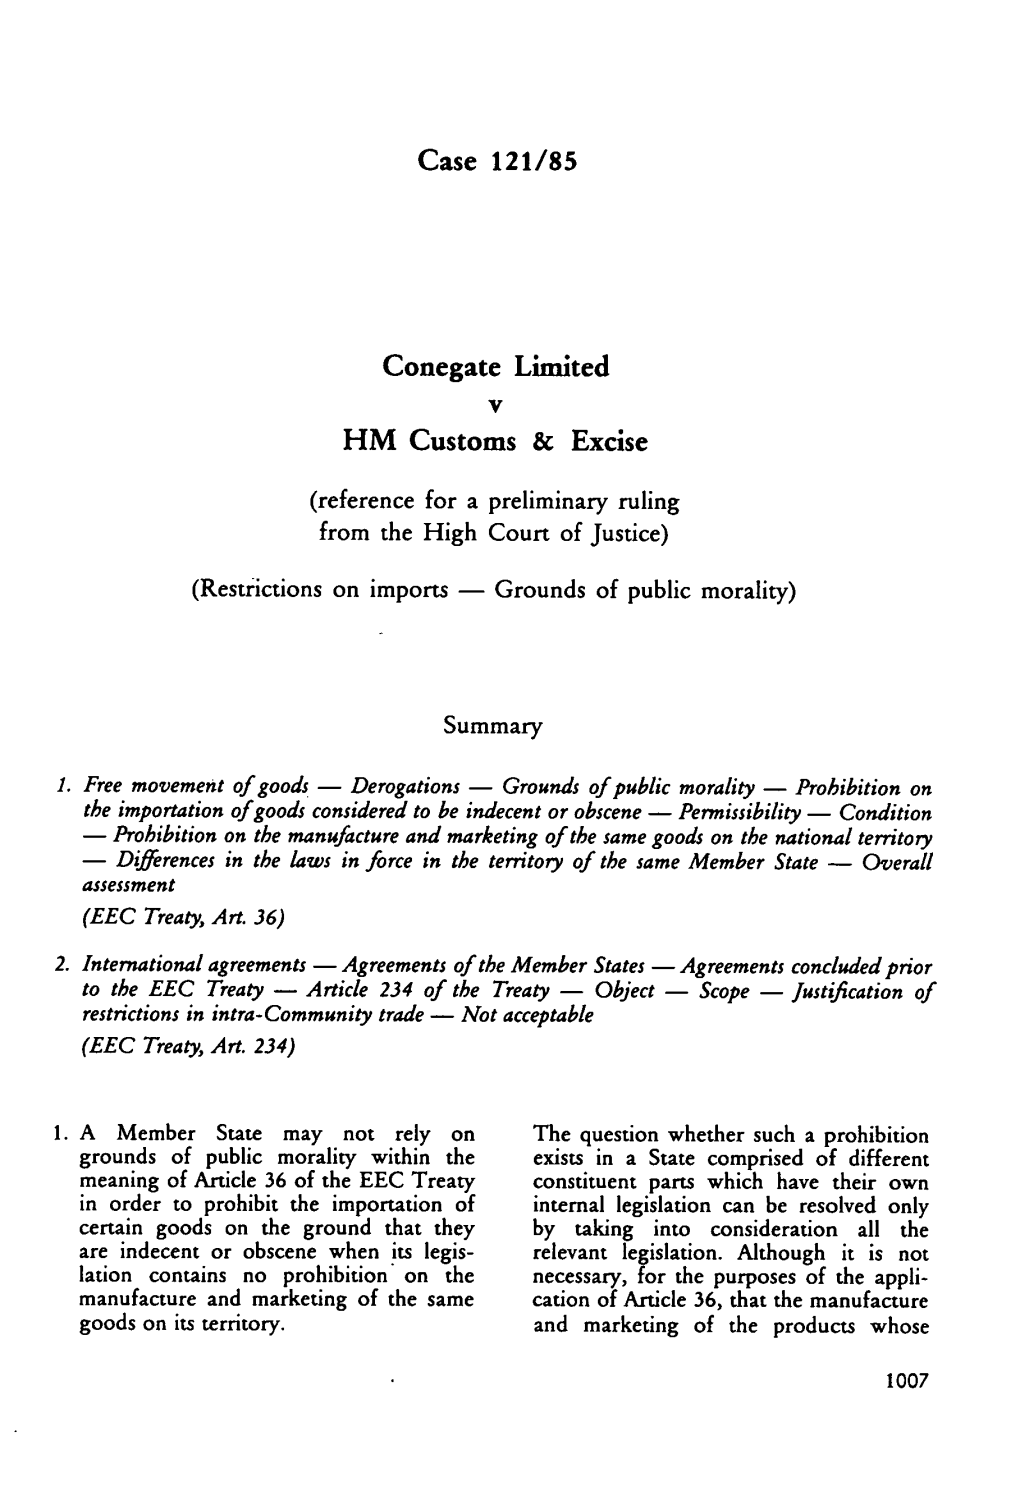 Case 121/85 Conegate Limited V HM Customs & Excise